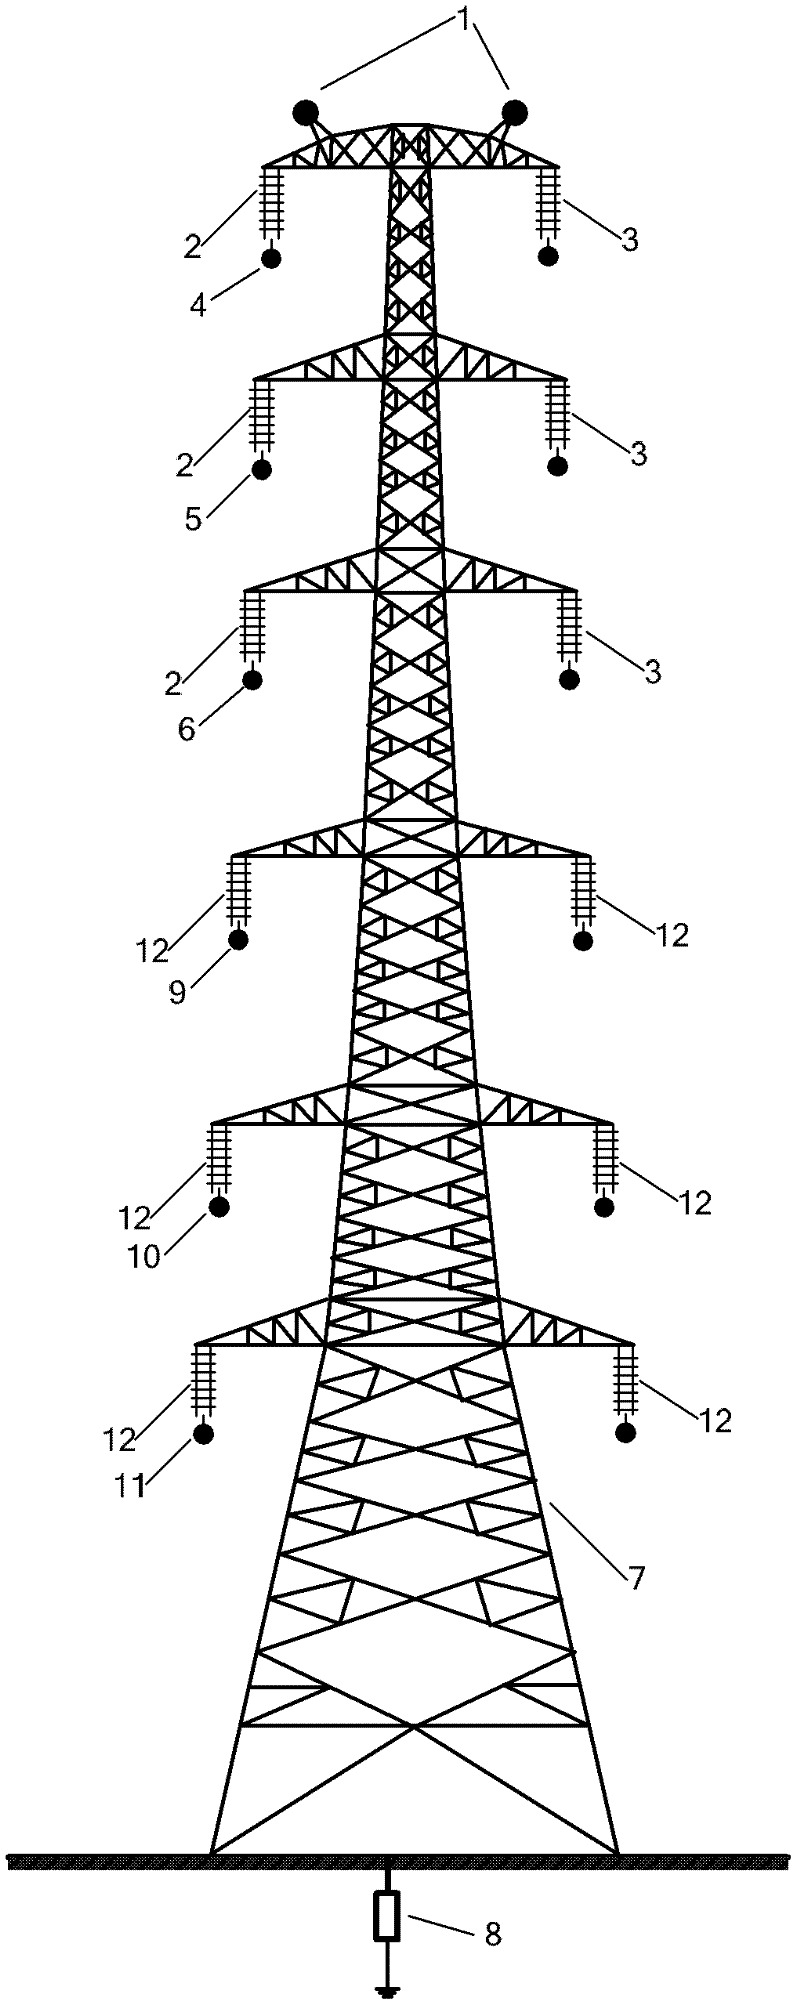 Same-tower four-loop power transmission line configured with differentiation insulators